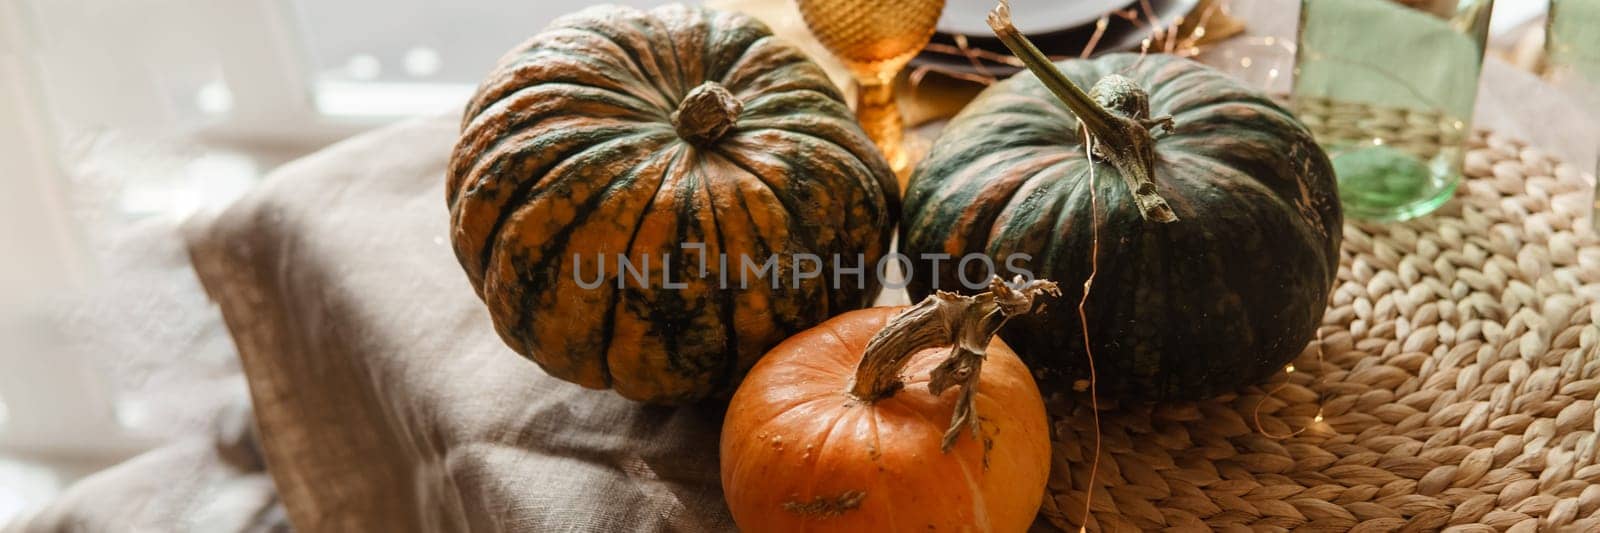 Autumn interior: a table covered with dishes, pumpkins, a relaxed composition of Japanese pampas grass. Interior in the photo Studio. Close - up of a decorated autumn table by Annu1tochka